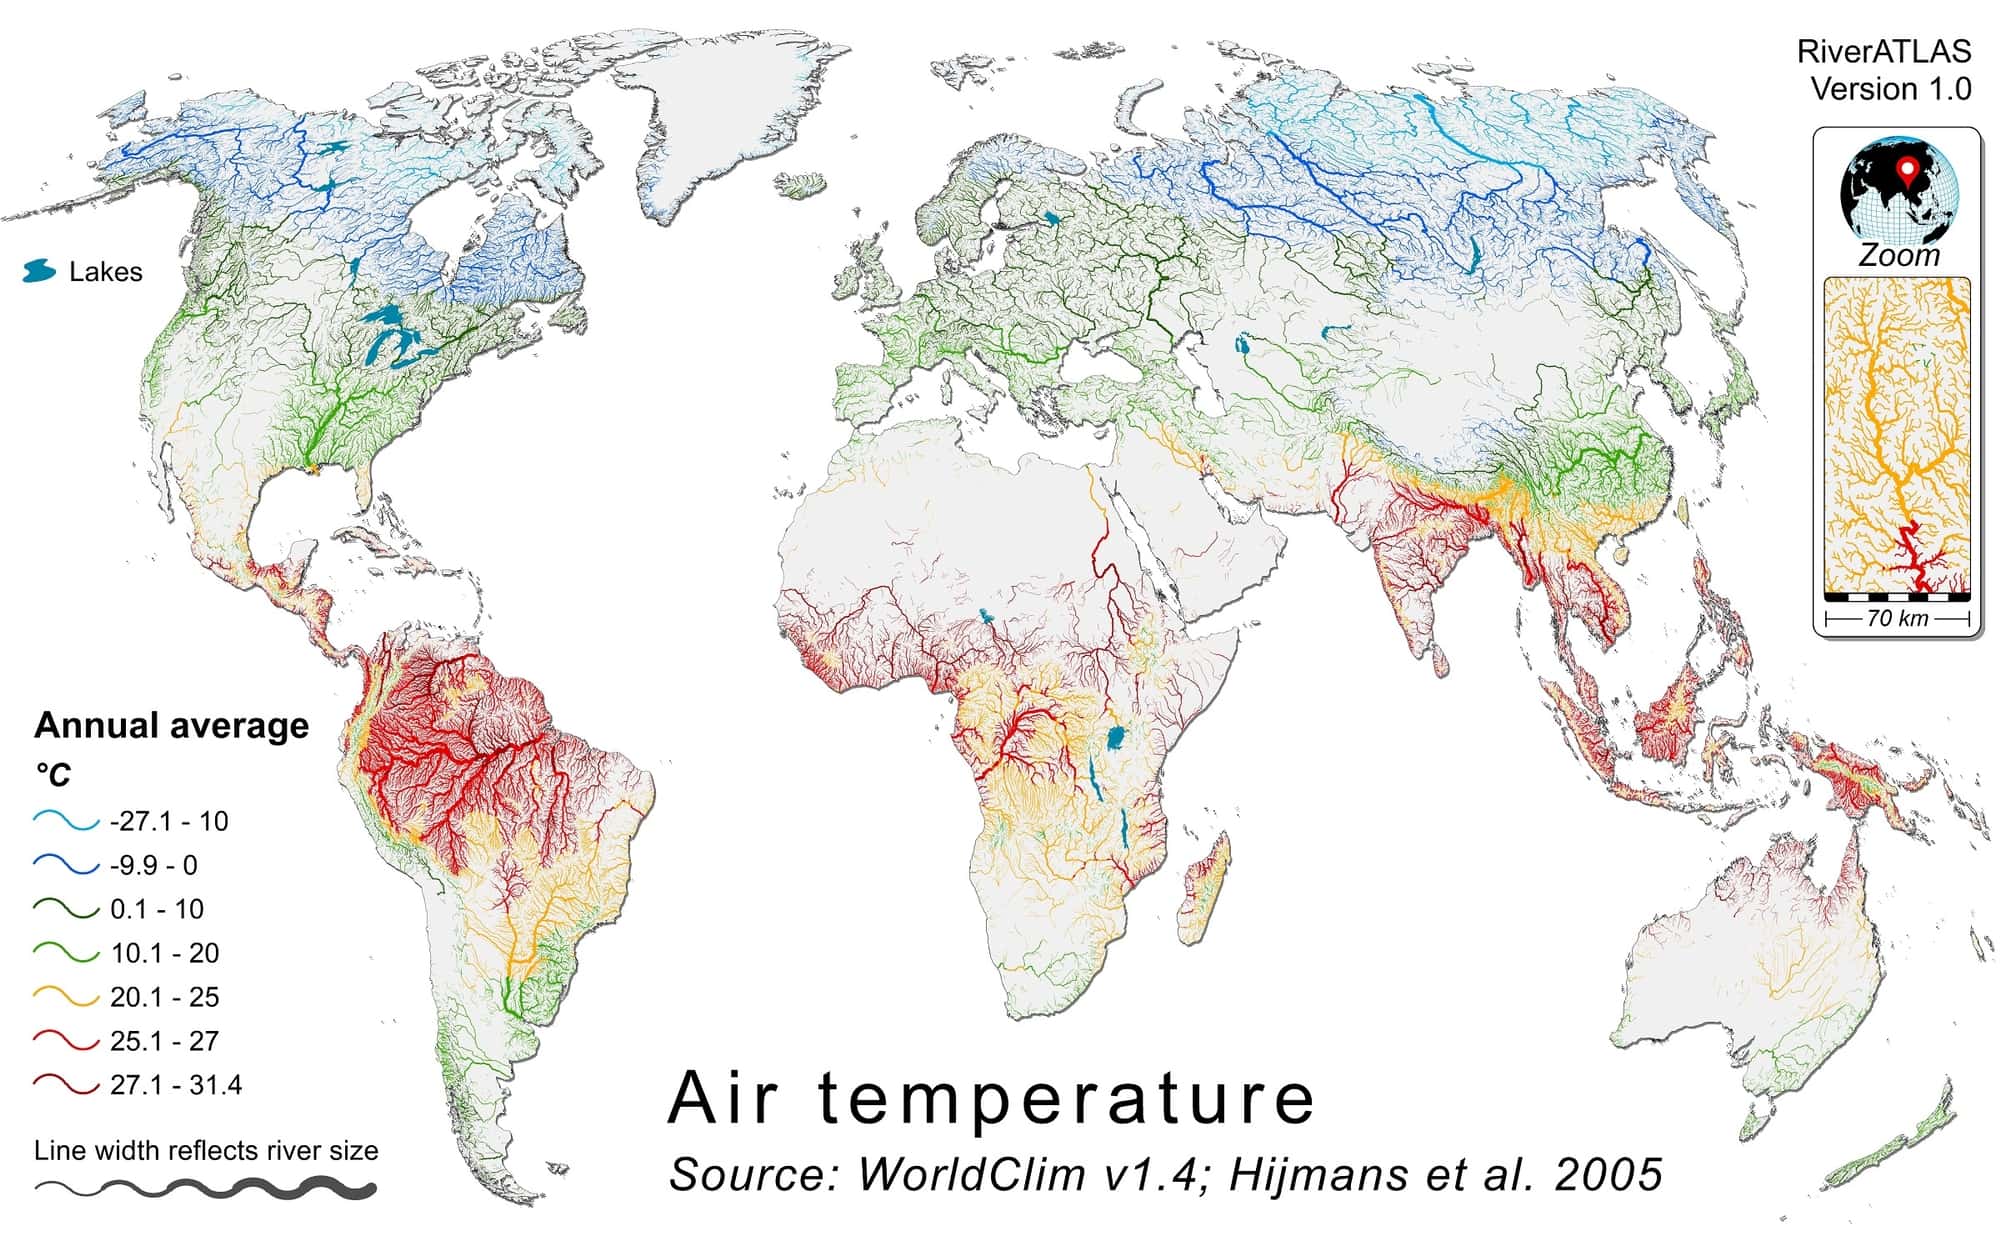 Global map of average temperature per river reach. Temperatures range from dark red (hot) to light blue (cold).